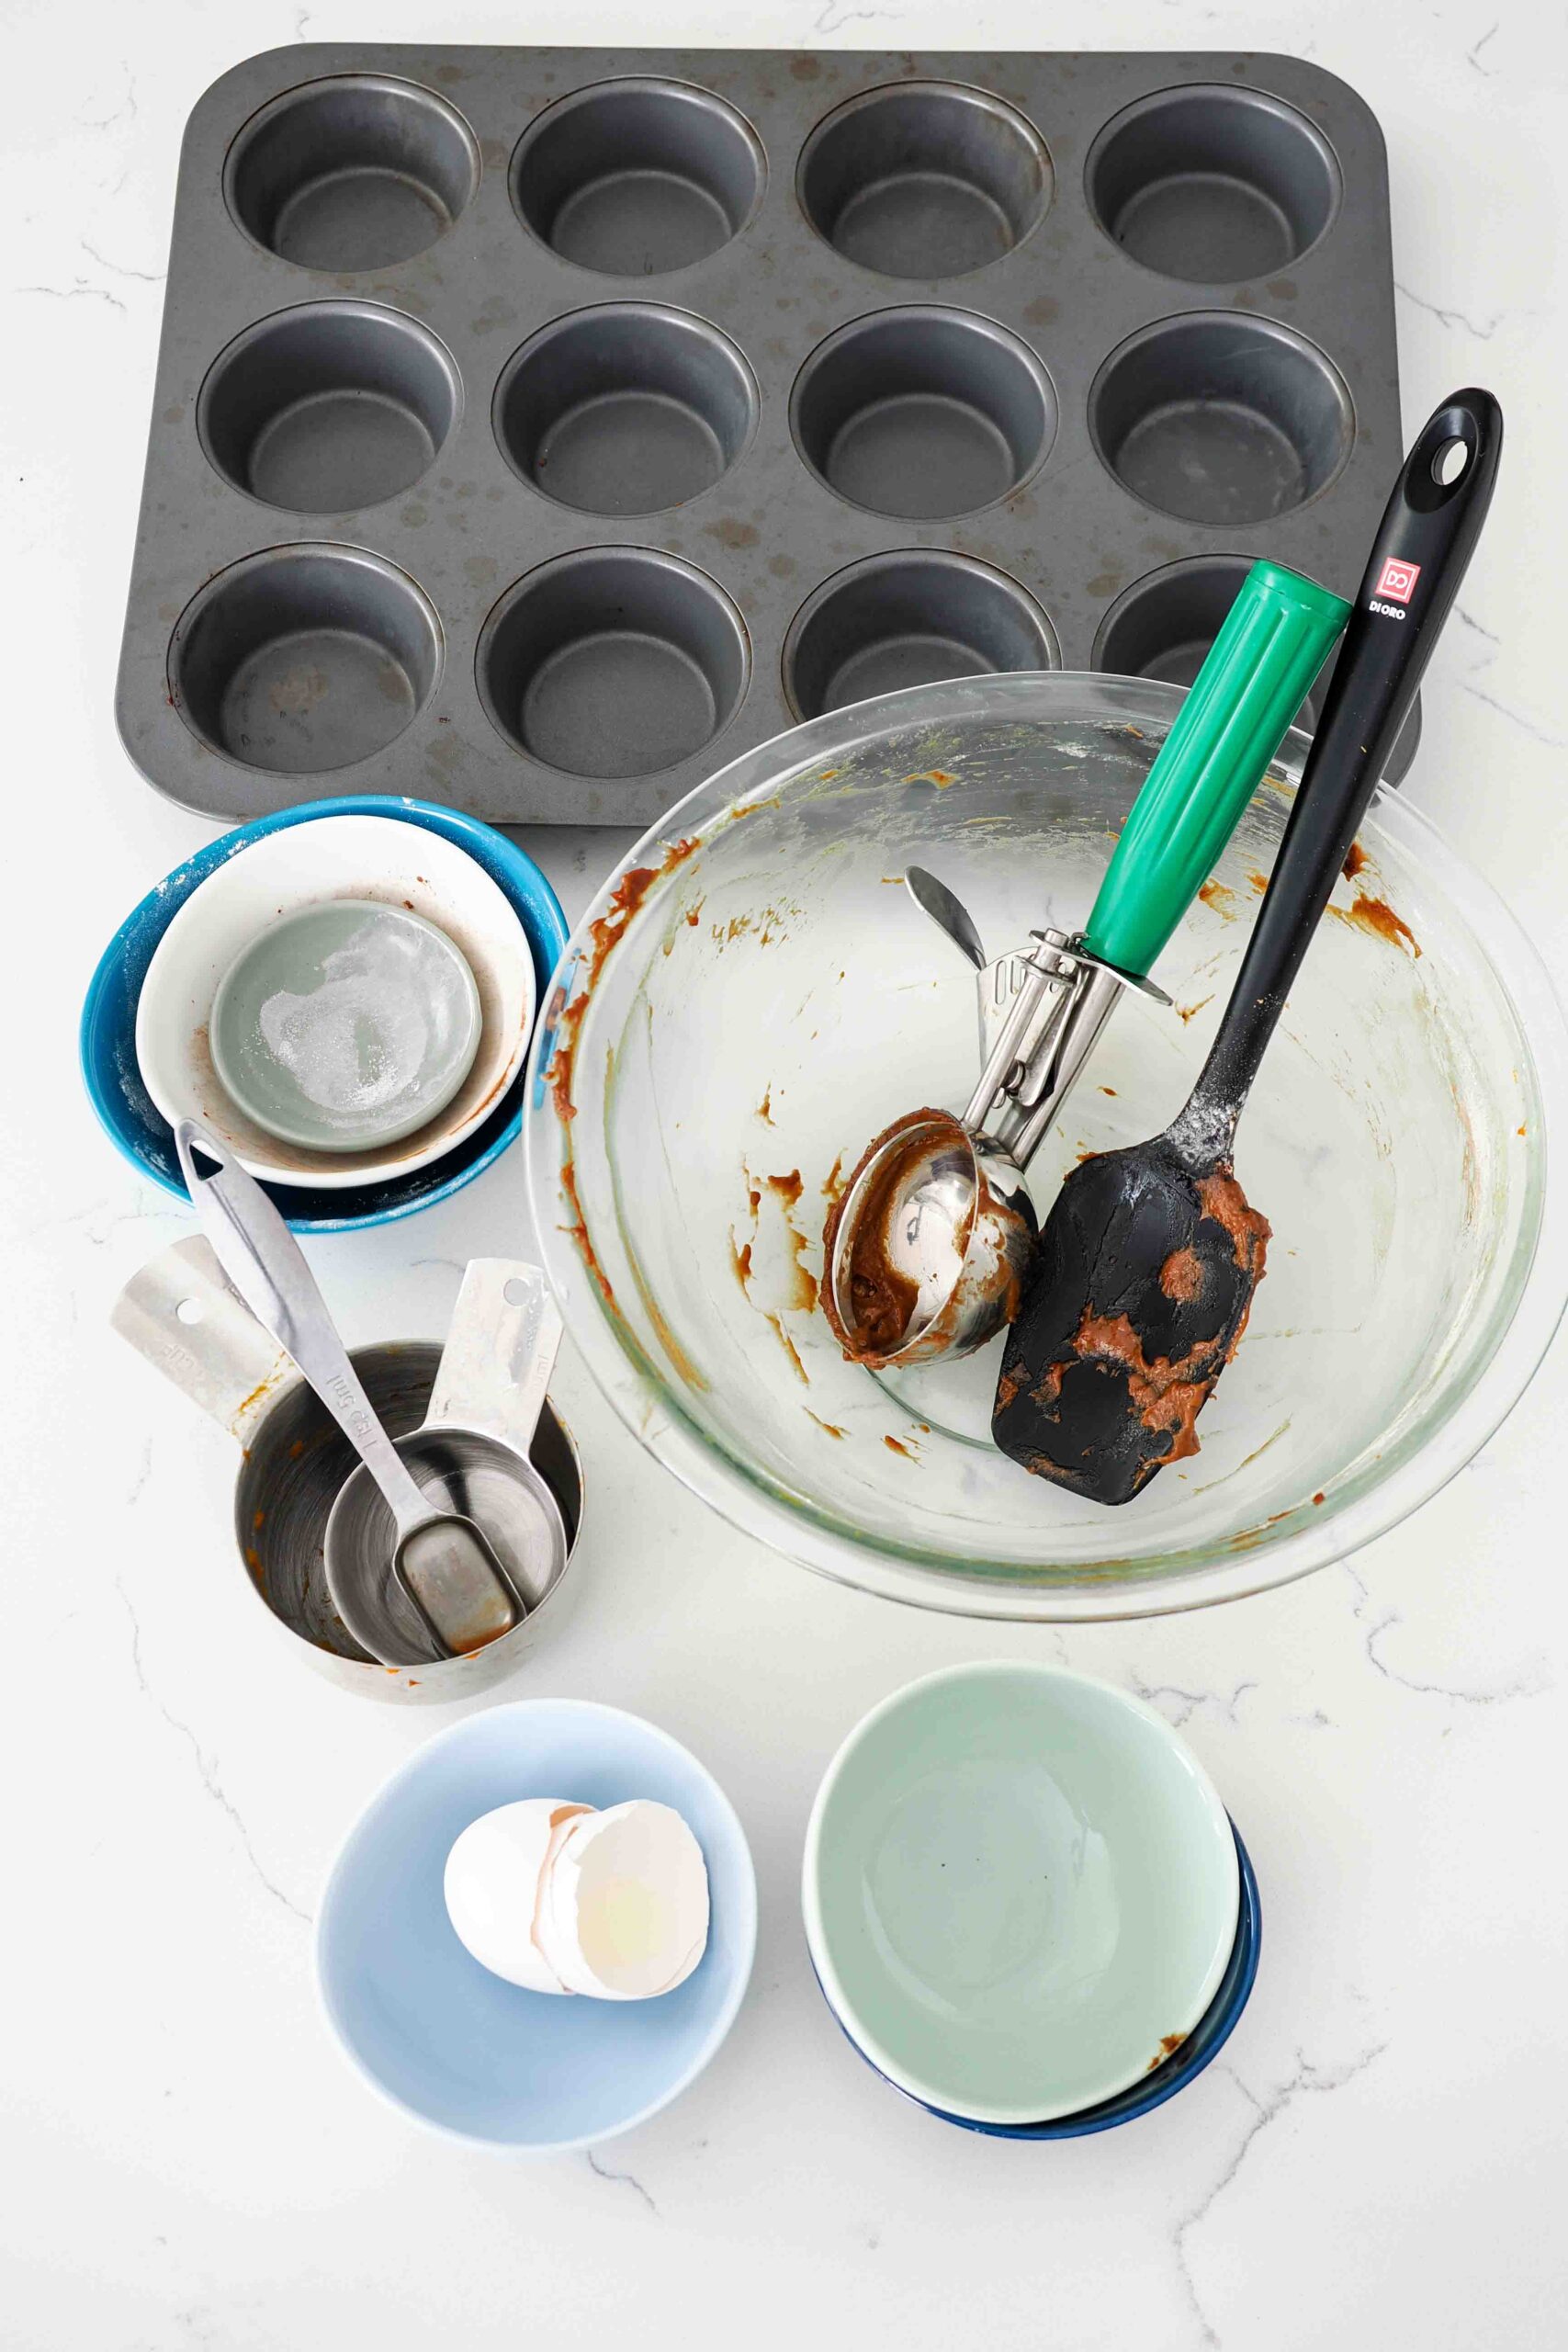 All the dishes used to make chocolate pumpkin muffins on a quartz counter.